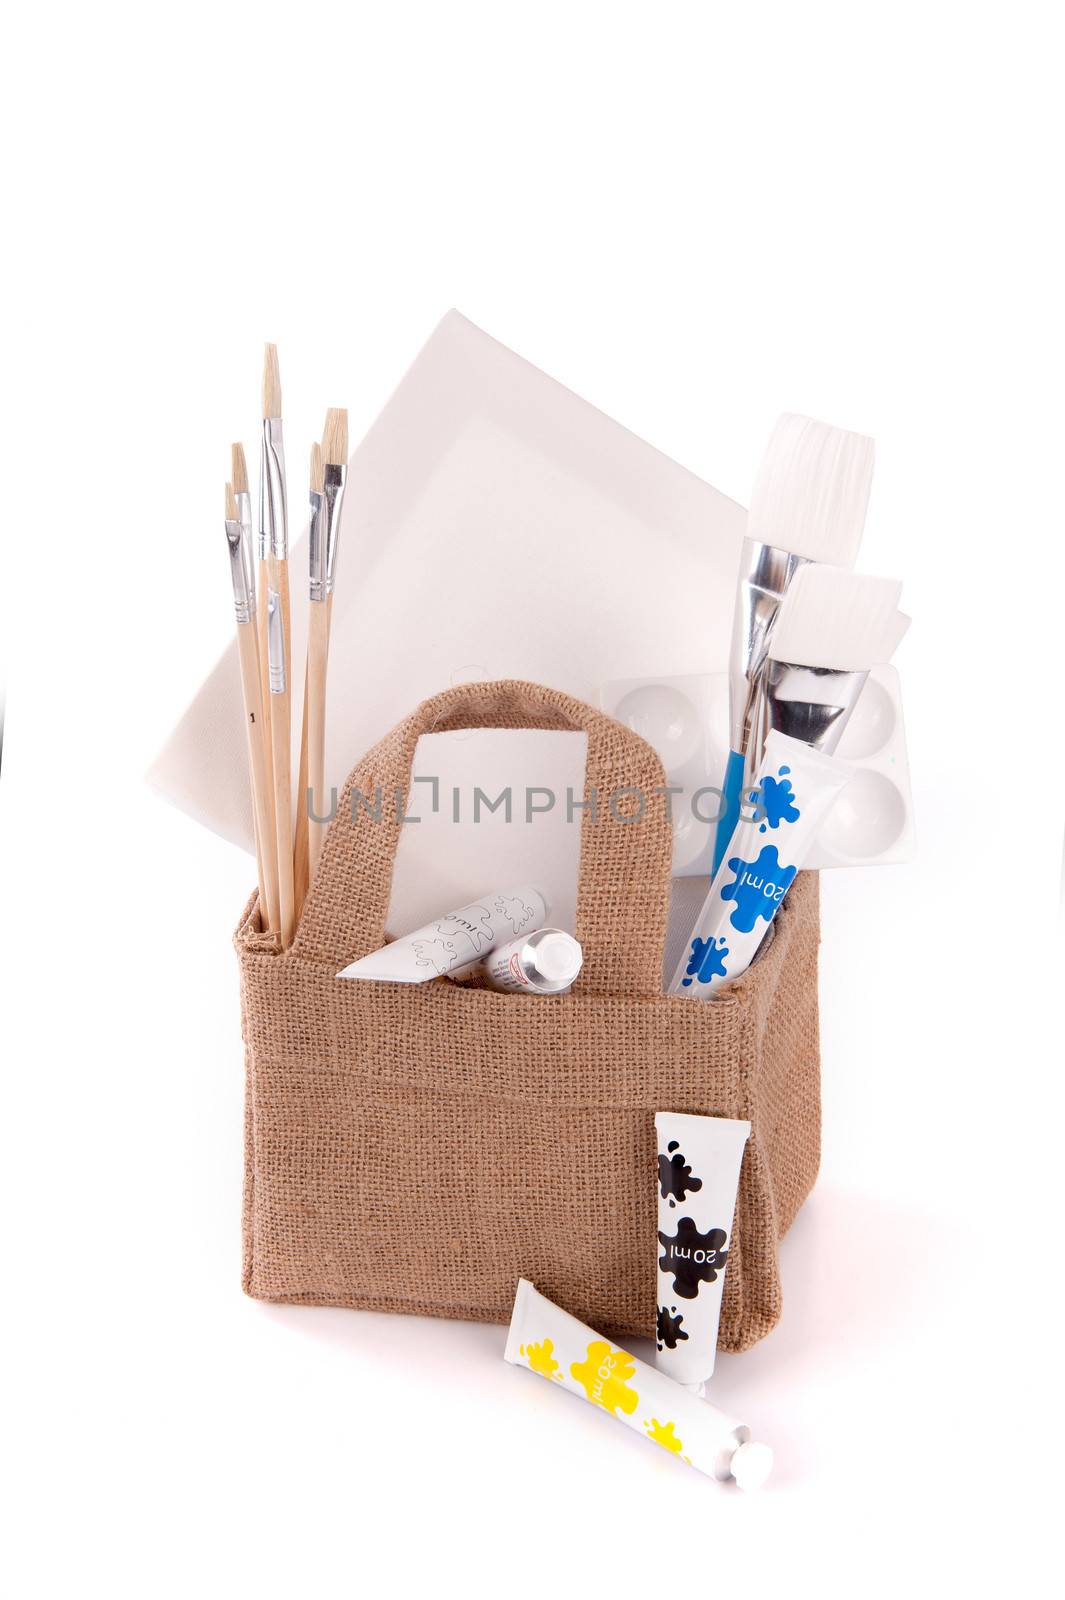 a bag with drawing and painting equipment on a white background